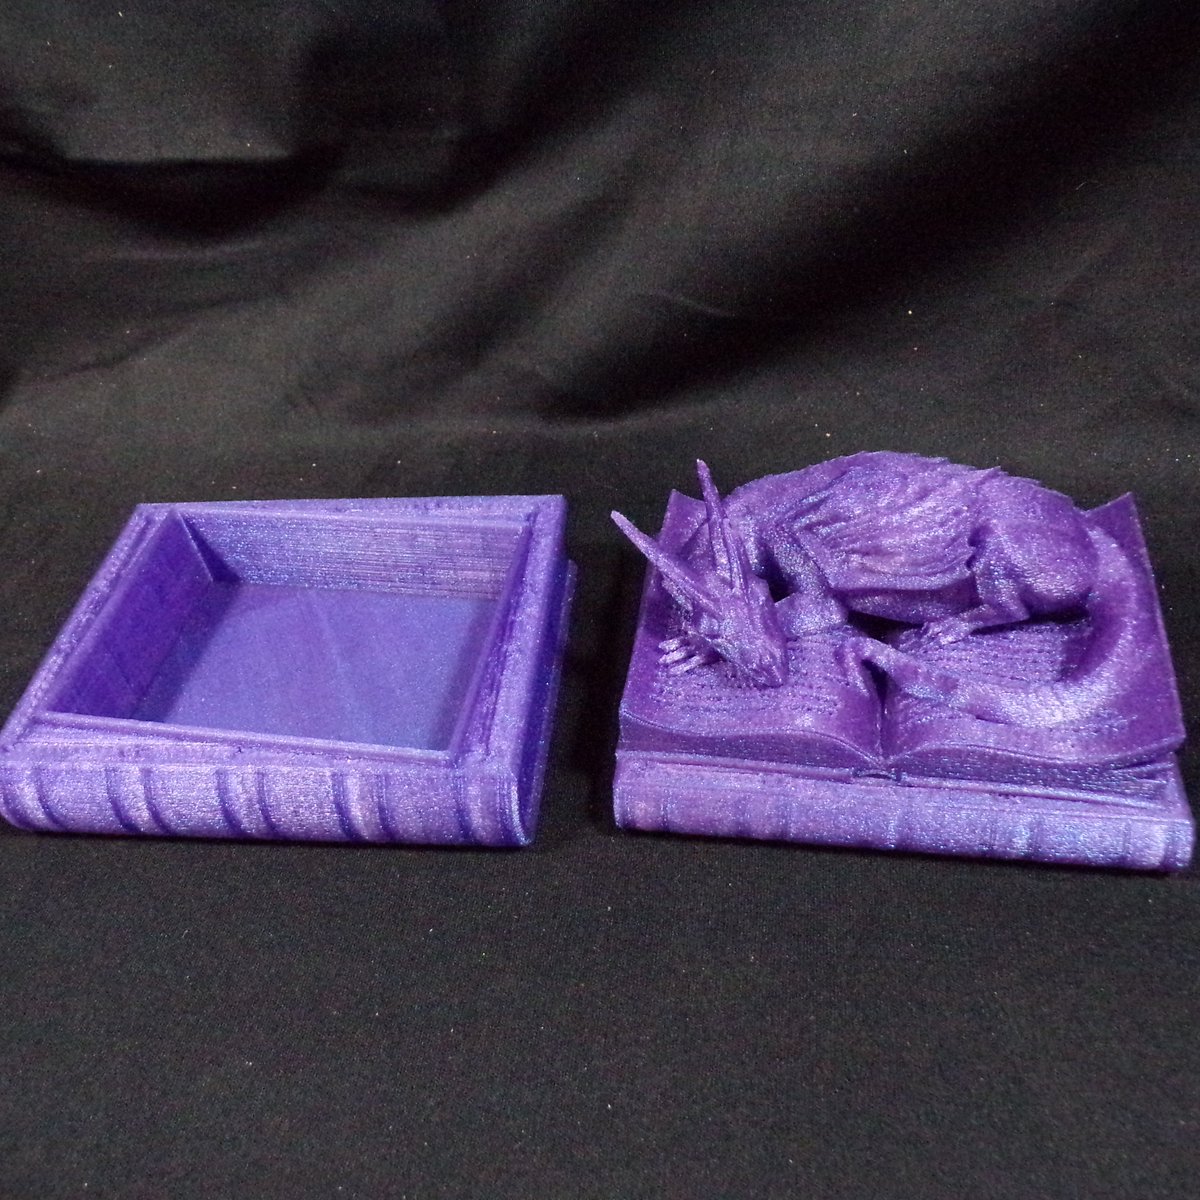 Who doesn't love a sleeping dragon (box)?   Made for an old friend who loves books, dice, and dragons!  Design by the amazing @FatesEndGames. (You should really check them out.)

#dice #dragon #dungeonsanddragons #dnd #3dprint